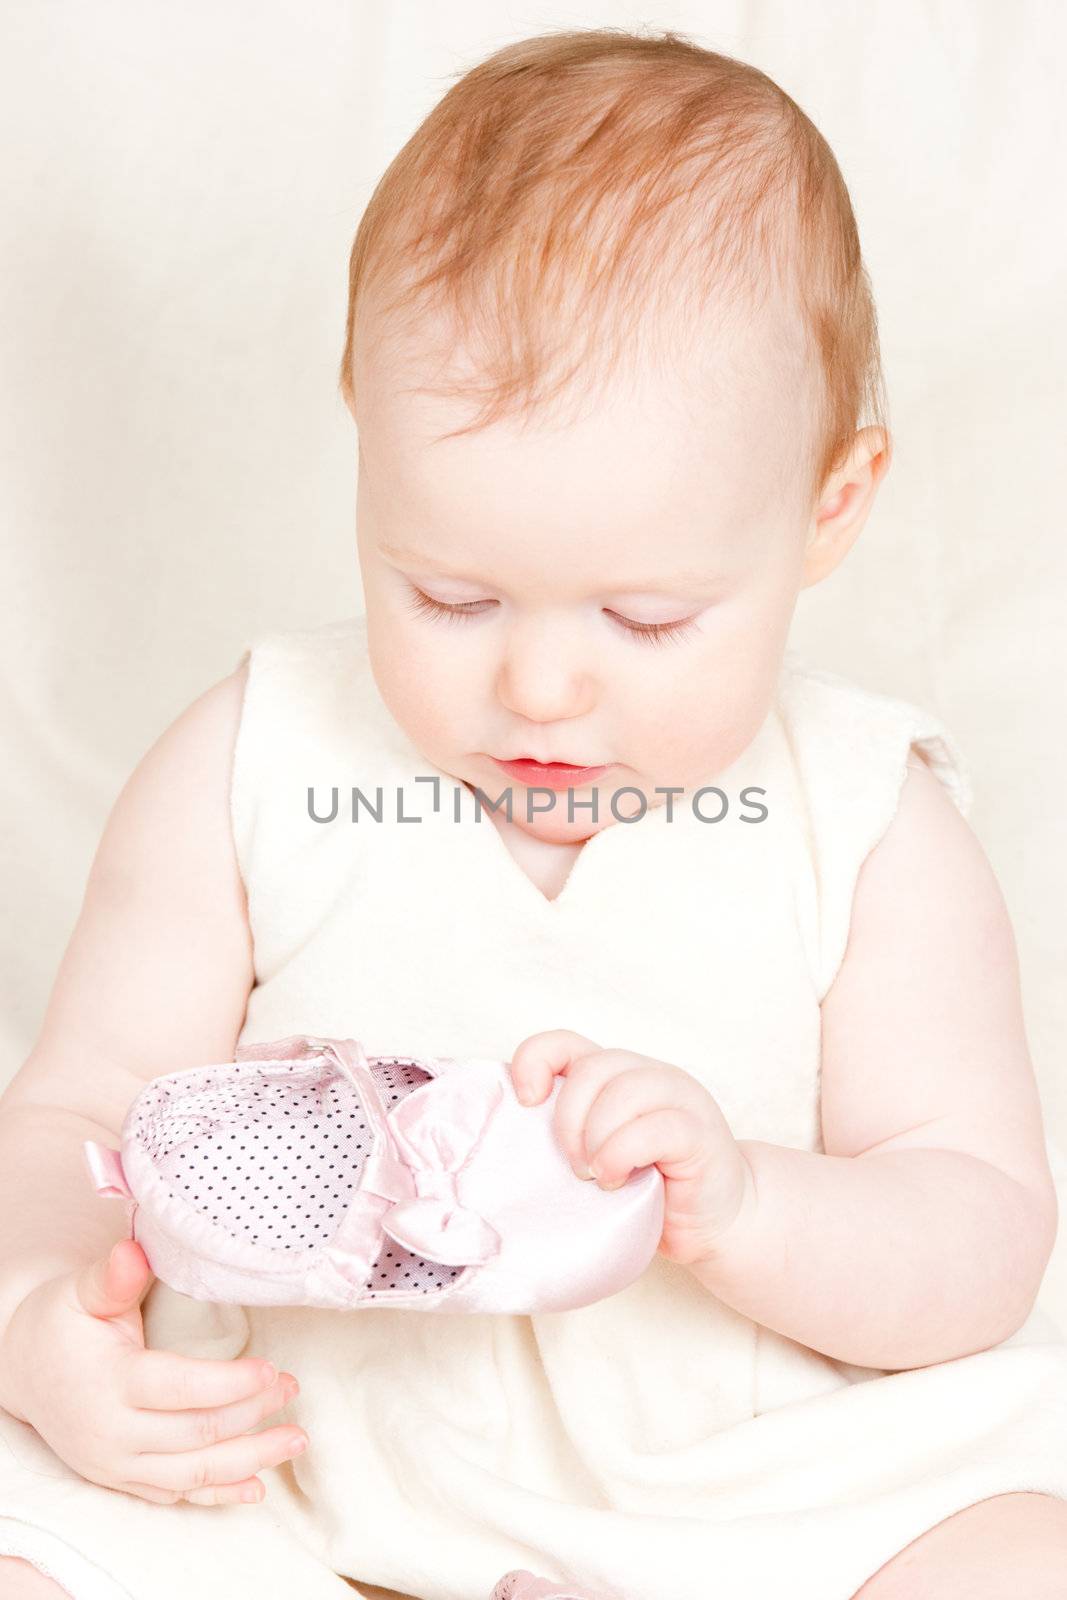 Infant with shoe by naumoid